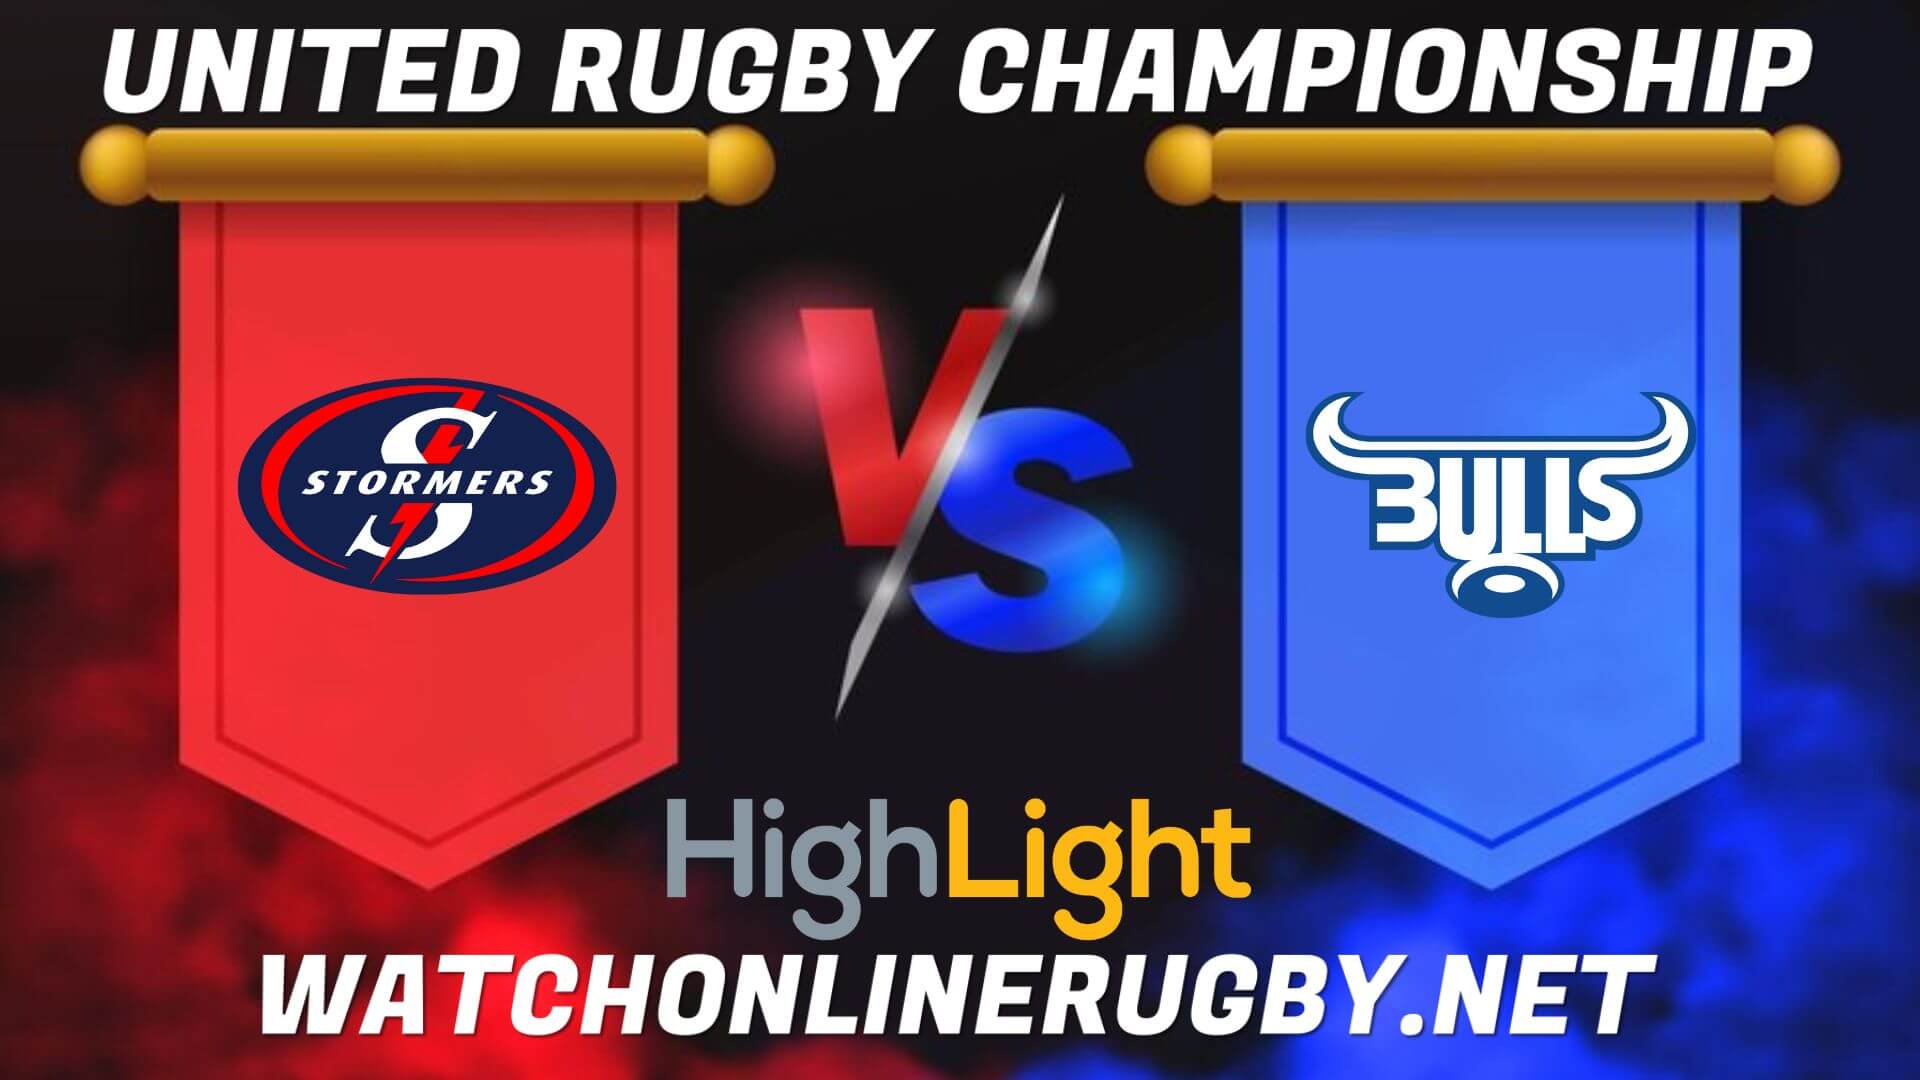 Stormers Vs Bulls United Rugby Championship 2022 Final